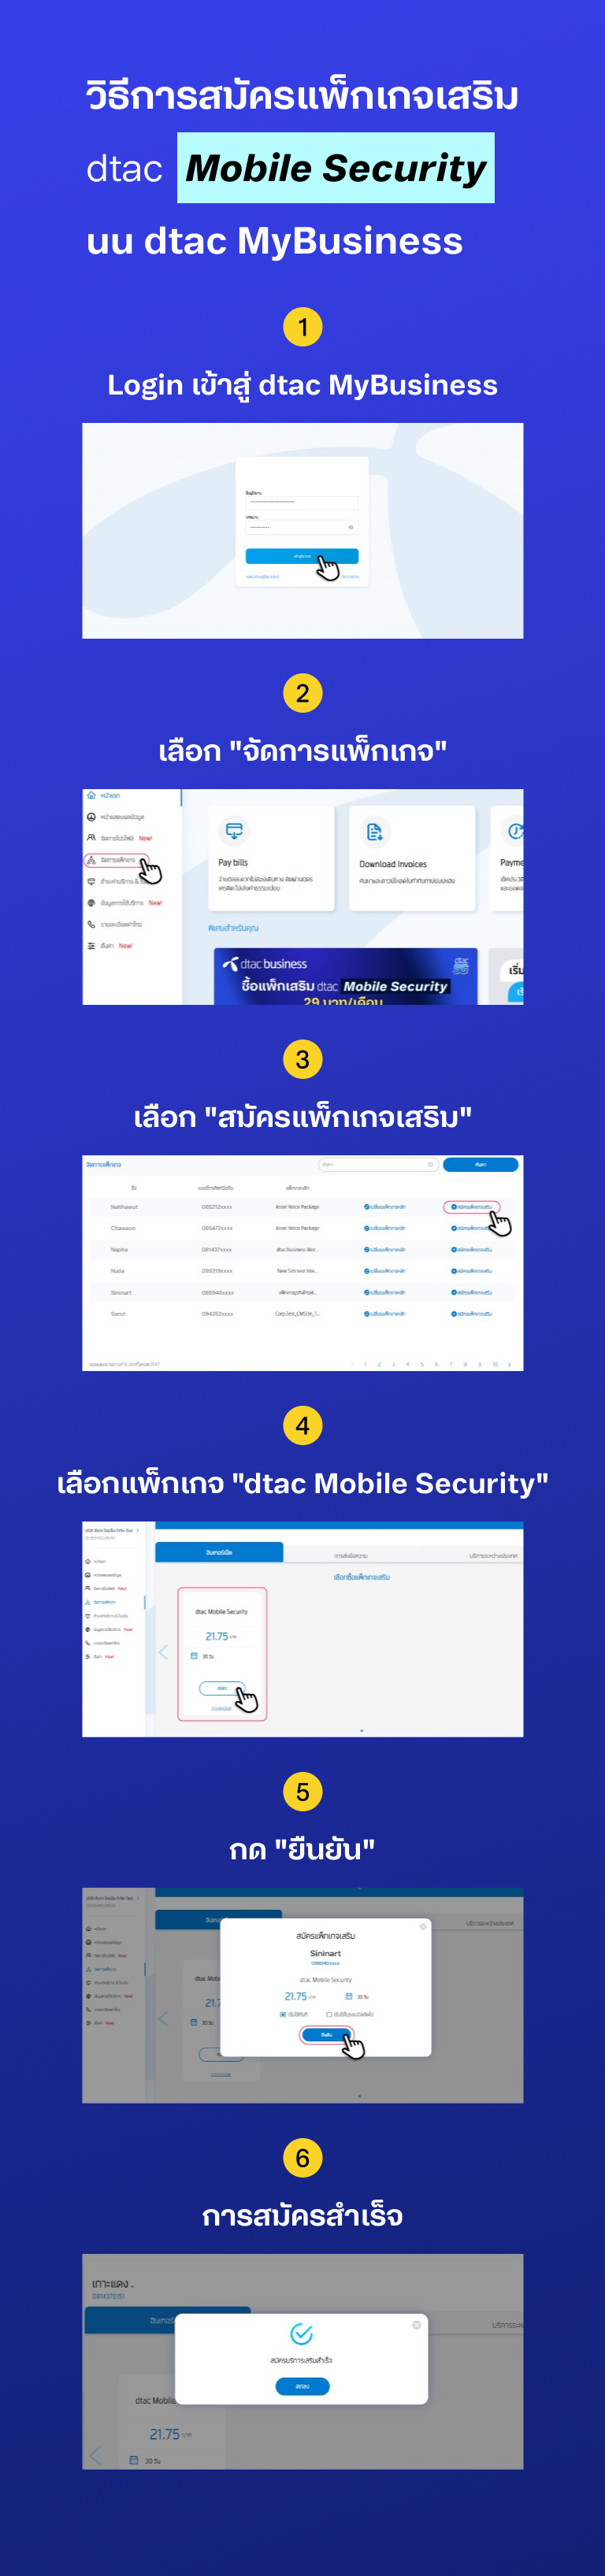 Mobile-Security-mobile